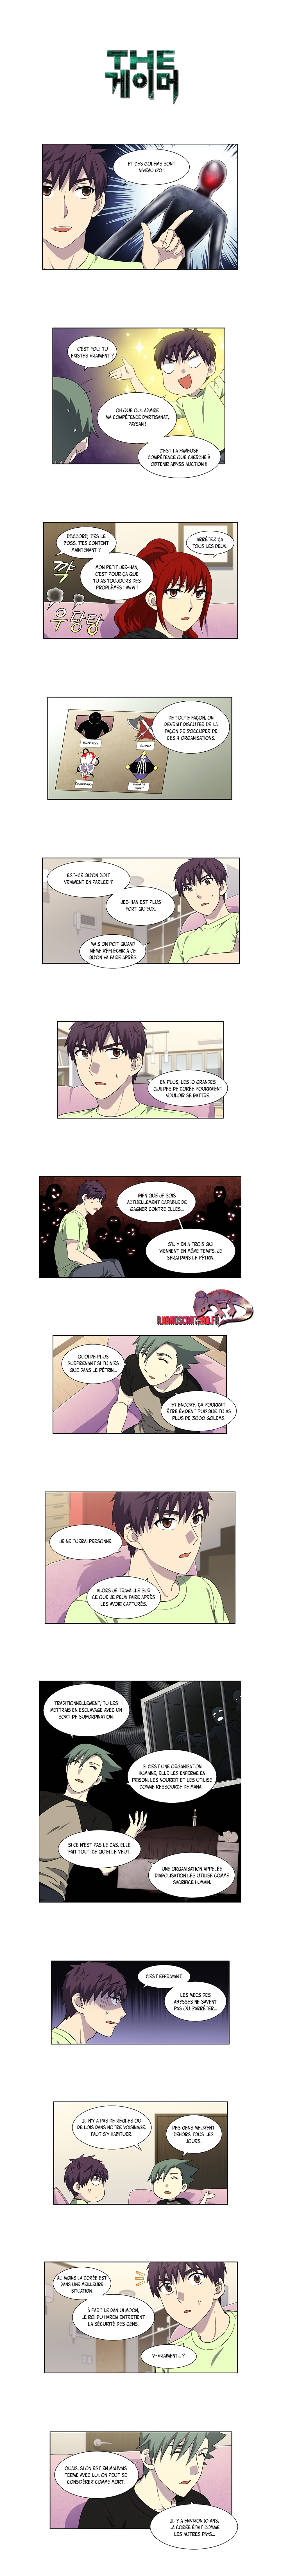 The Gamer: Chapter 303 - Page 1